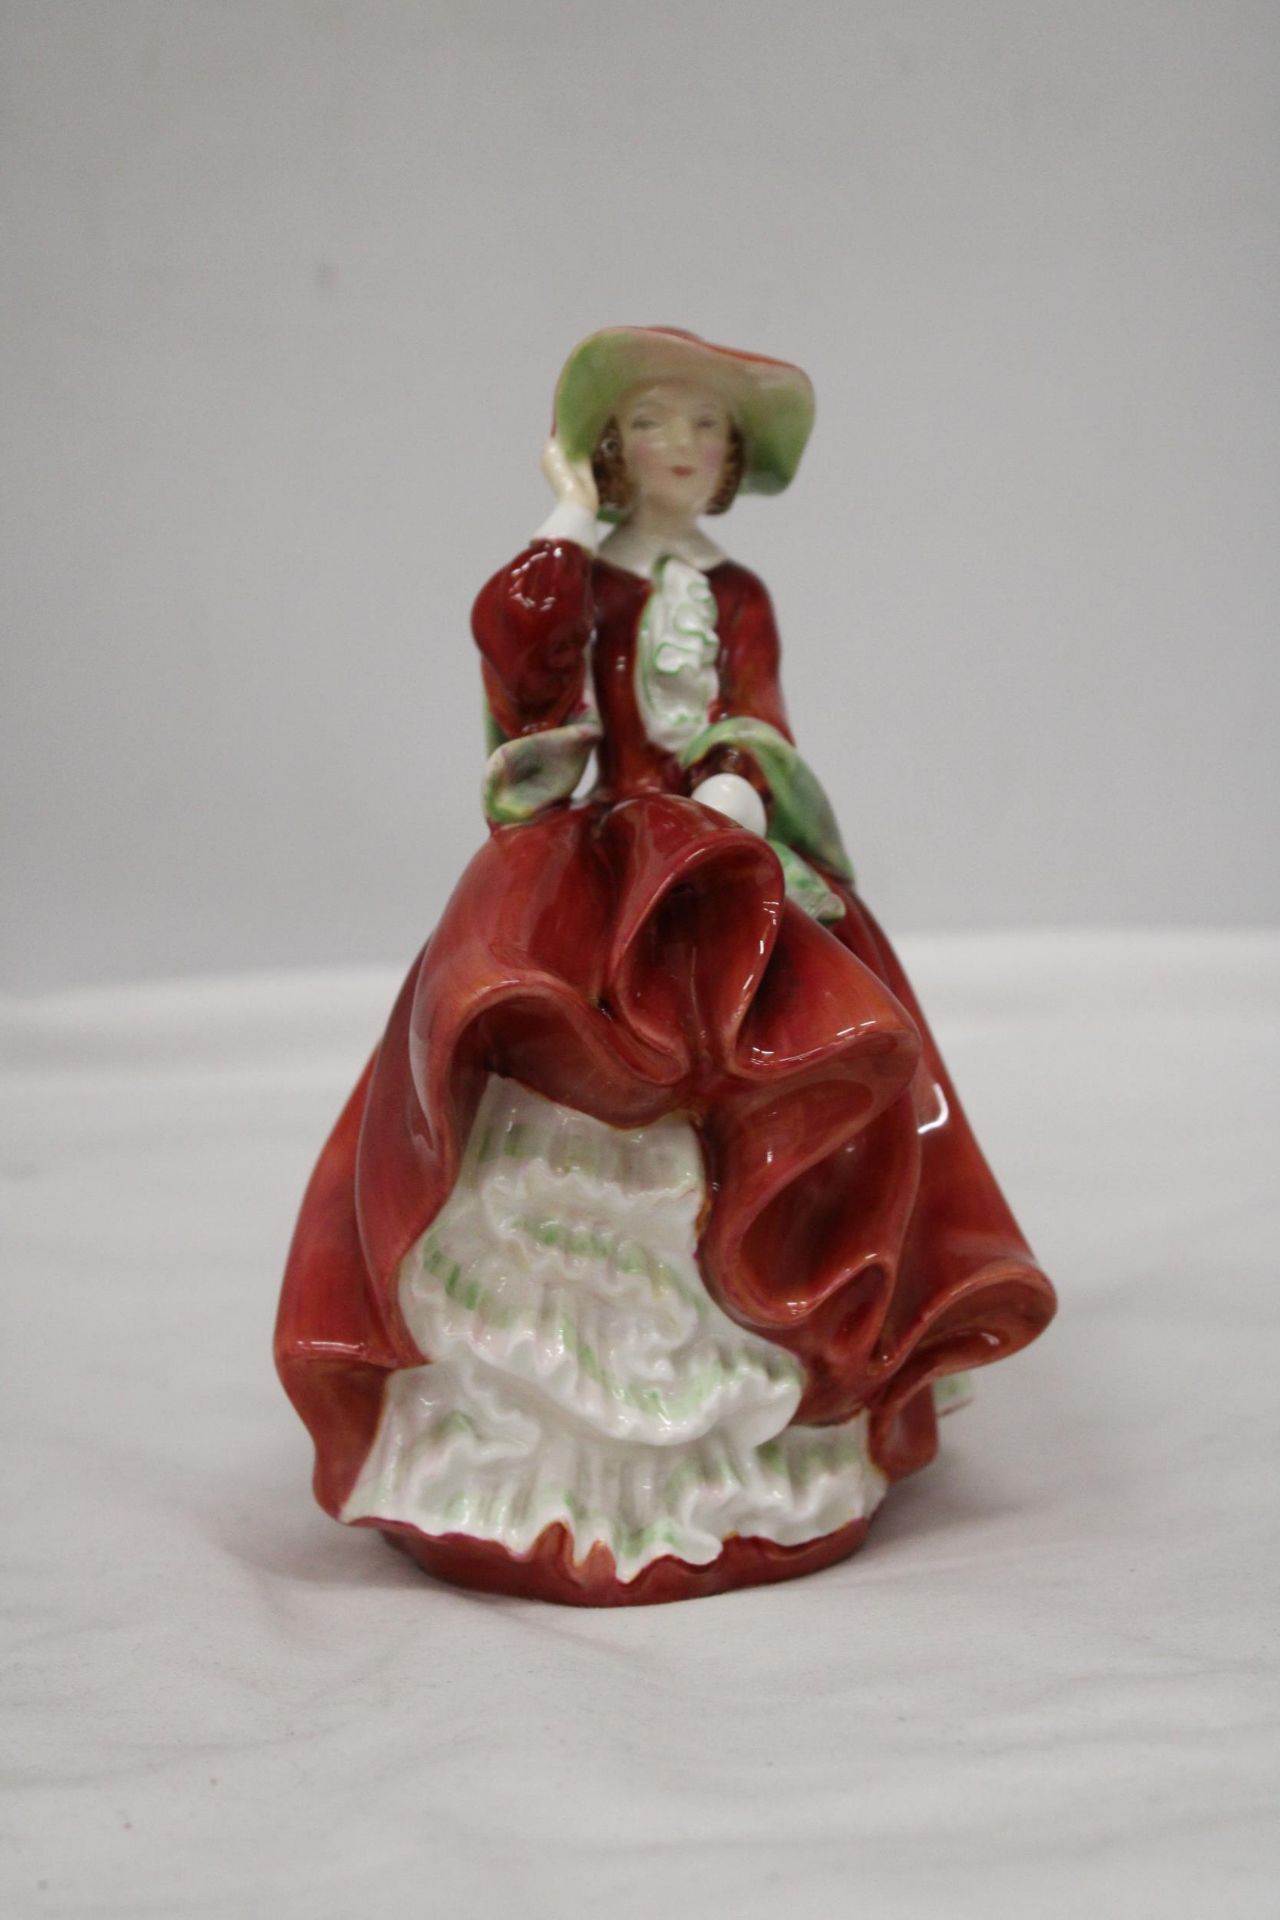 A ROYAL DOULTON FIGURE "TOP OF THE HILL" HN 1834 - Image 5 of 6